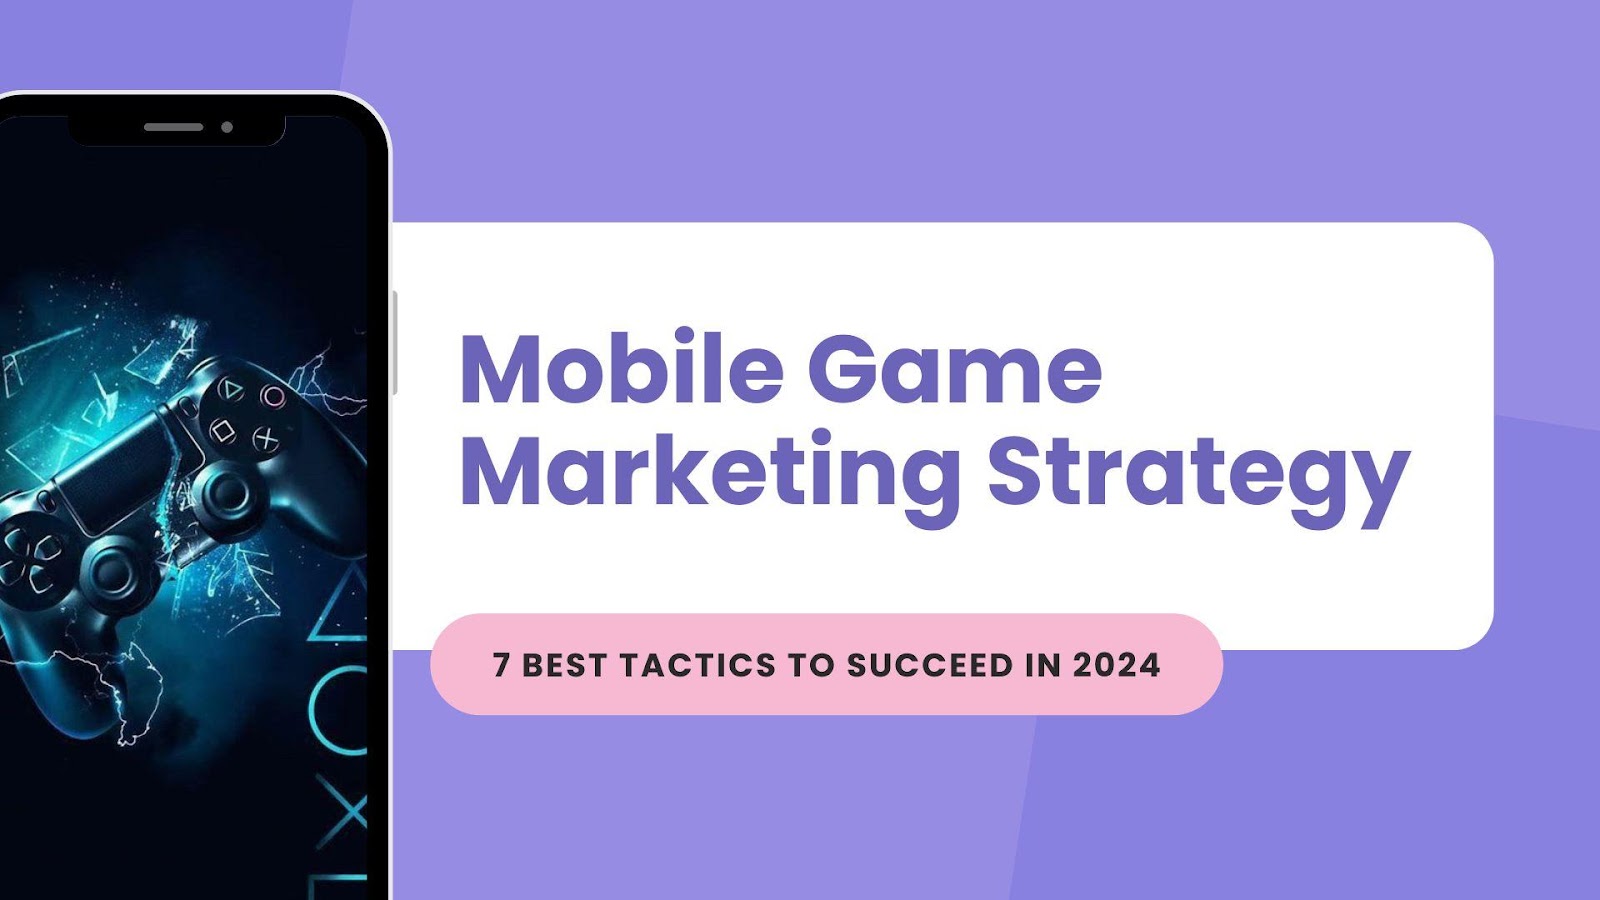 Mobile Game Marketing Strategy guide